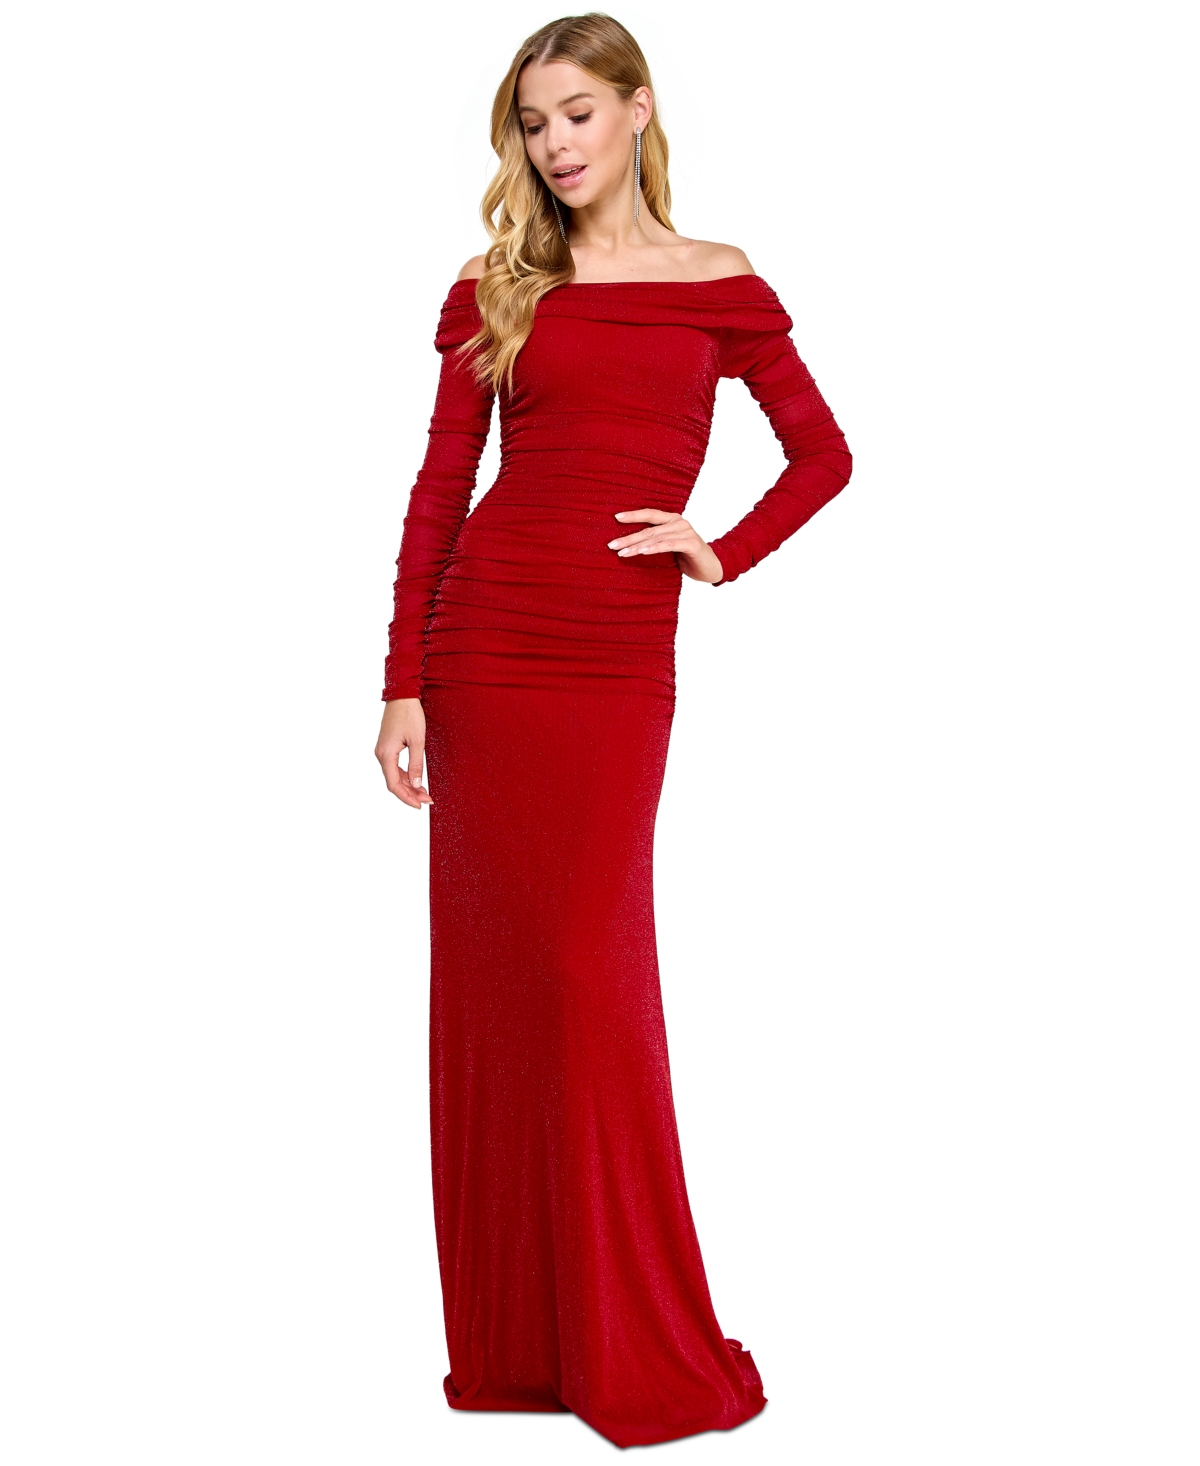 Juniors' Metallic Shirred Off-The-Shoulder Gown - Red/Silver